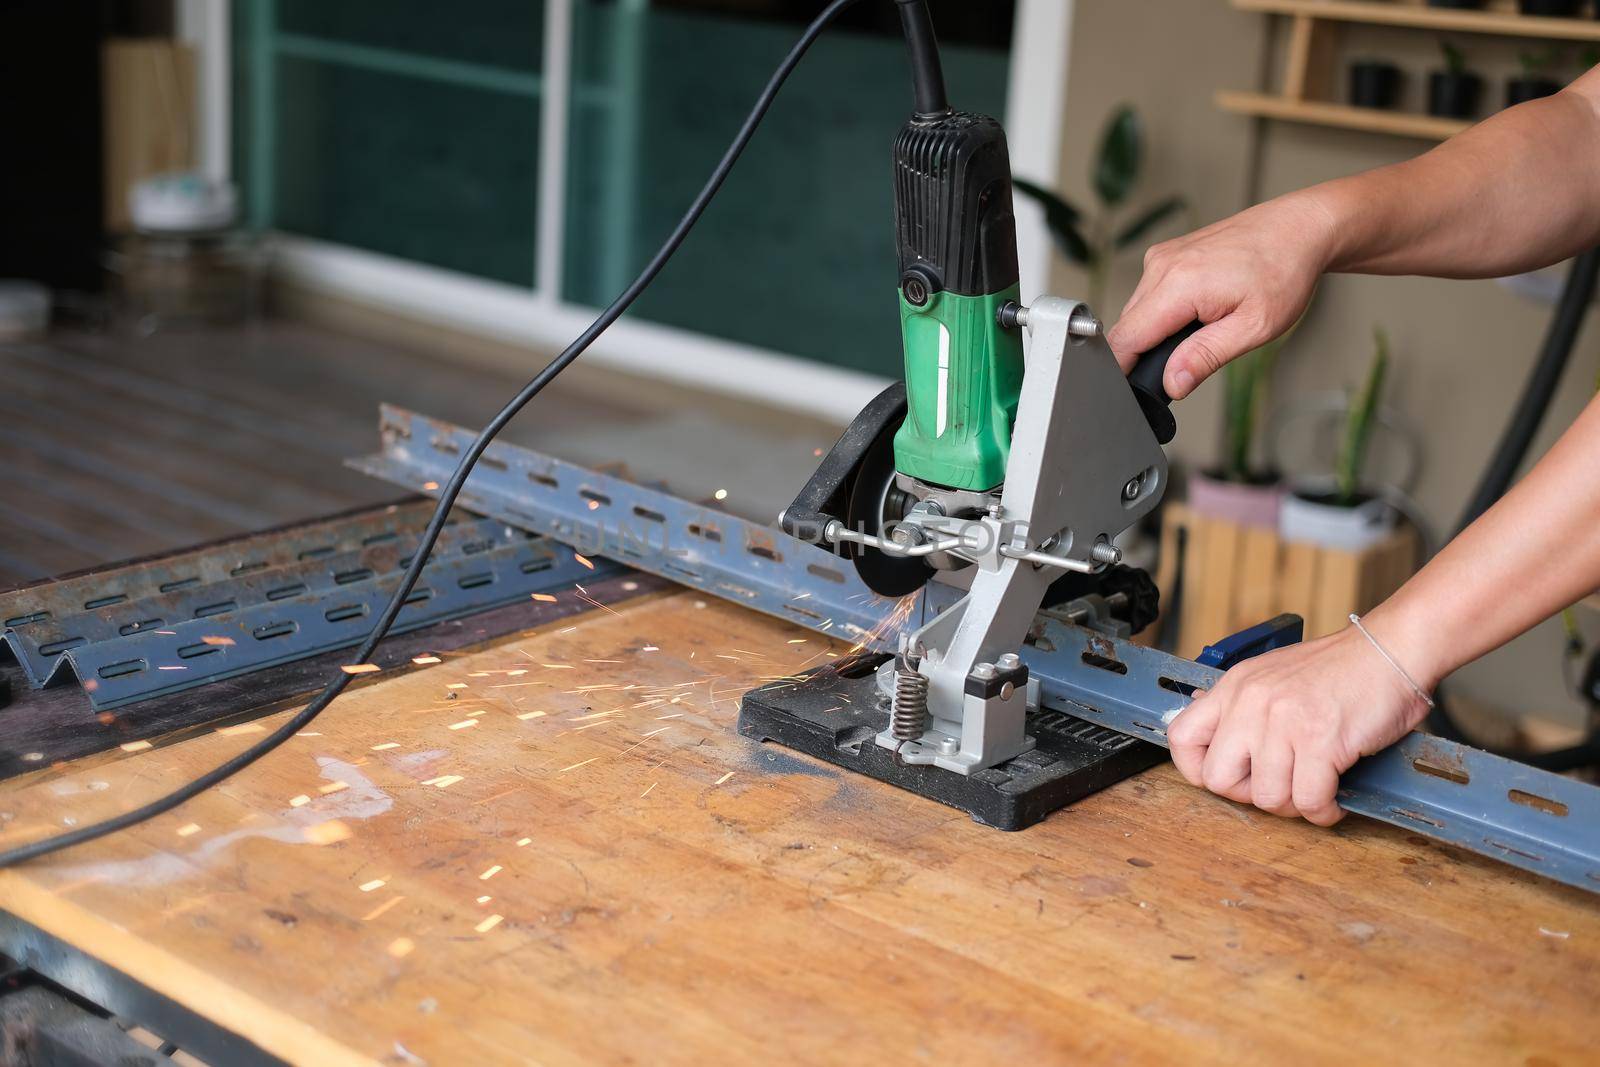 Craftsmen use iron cutters to assemble DIY projects during the holidays.